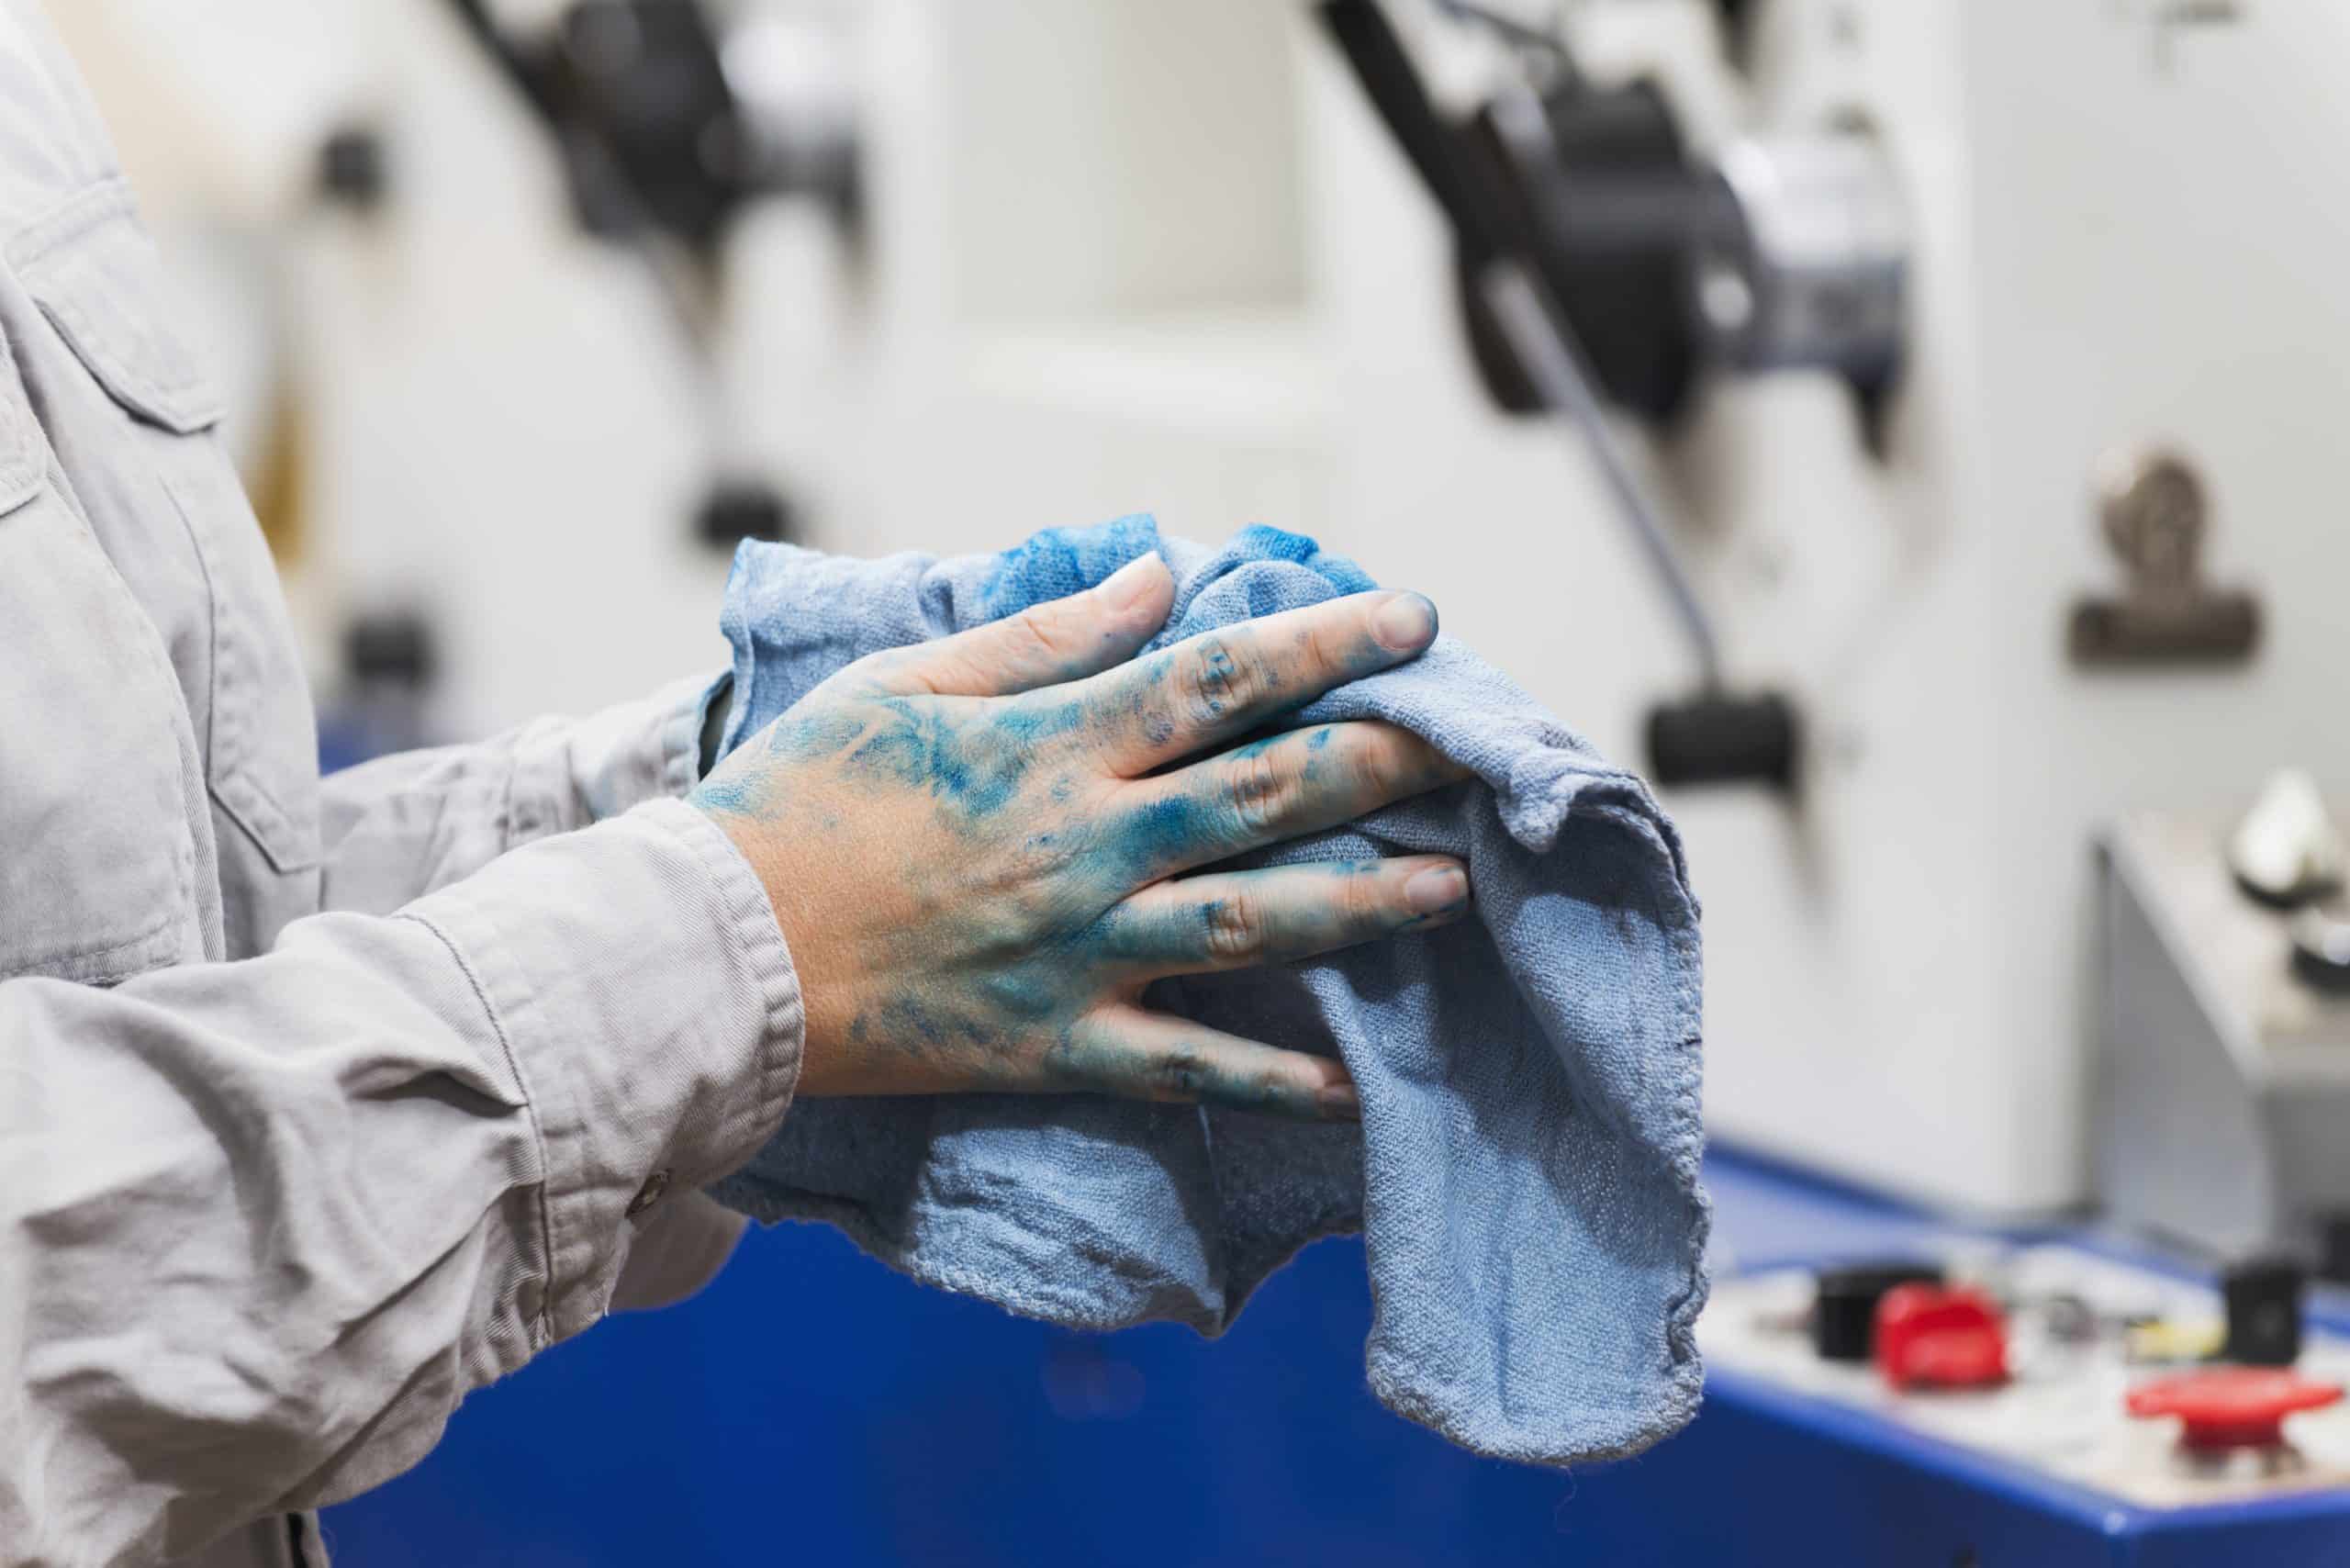 Hands of a female worker in a printing plant, splattered with blue ink. She is wiping her hands with a rag. Machinery is out of focus on background.